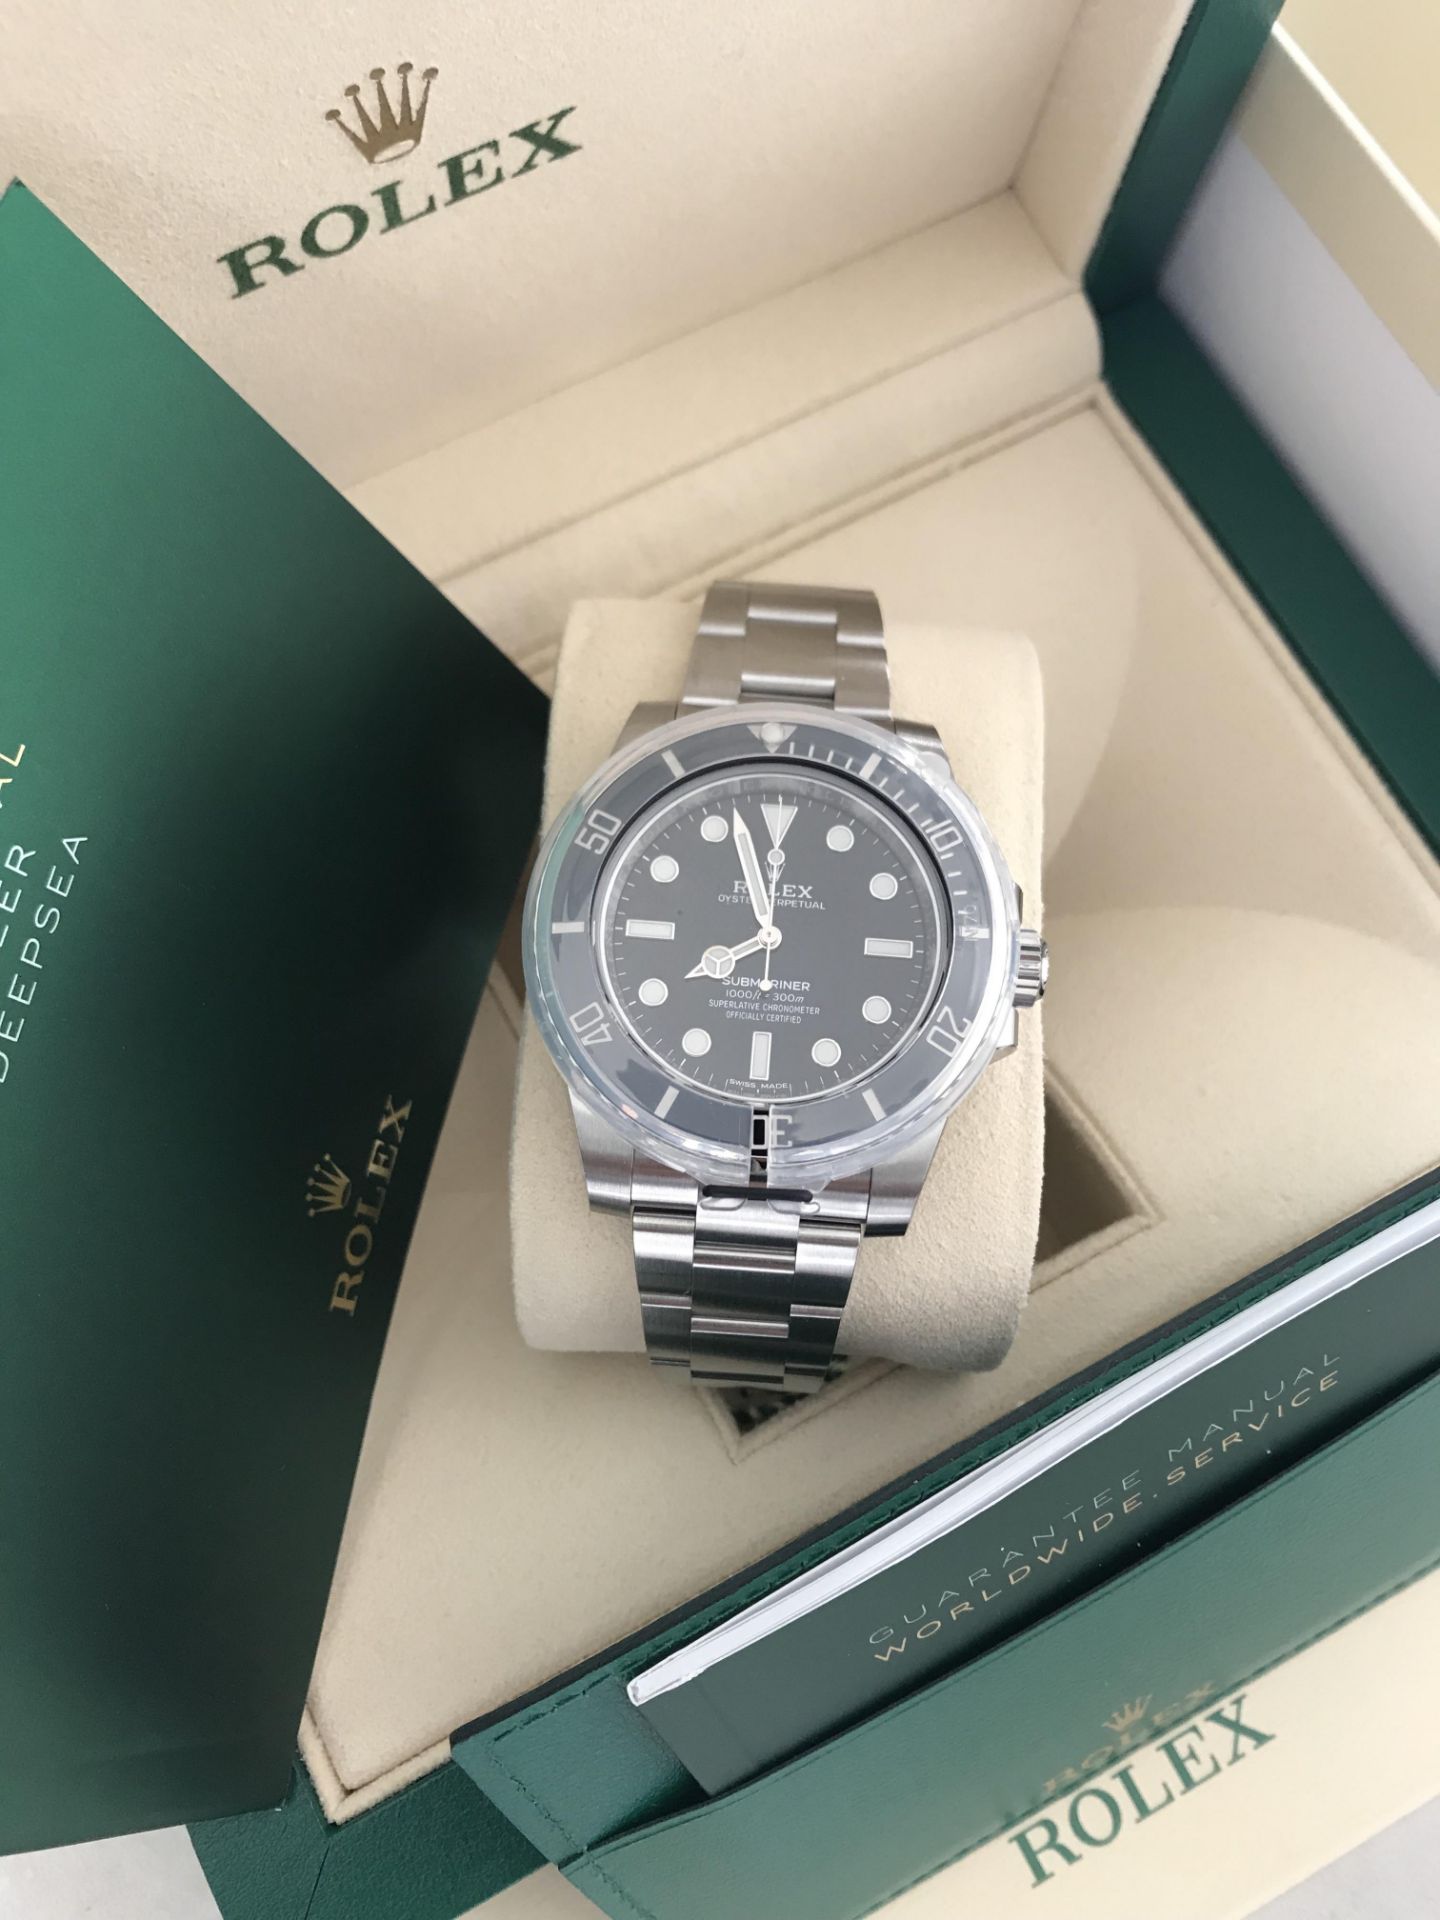 2020 ROLEX SUBMARINER OYSTER STEEL 40 MM WATCH 114060 - Image 4 of 15